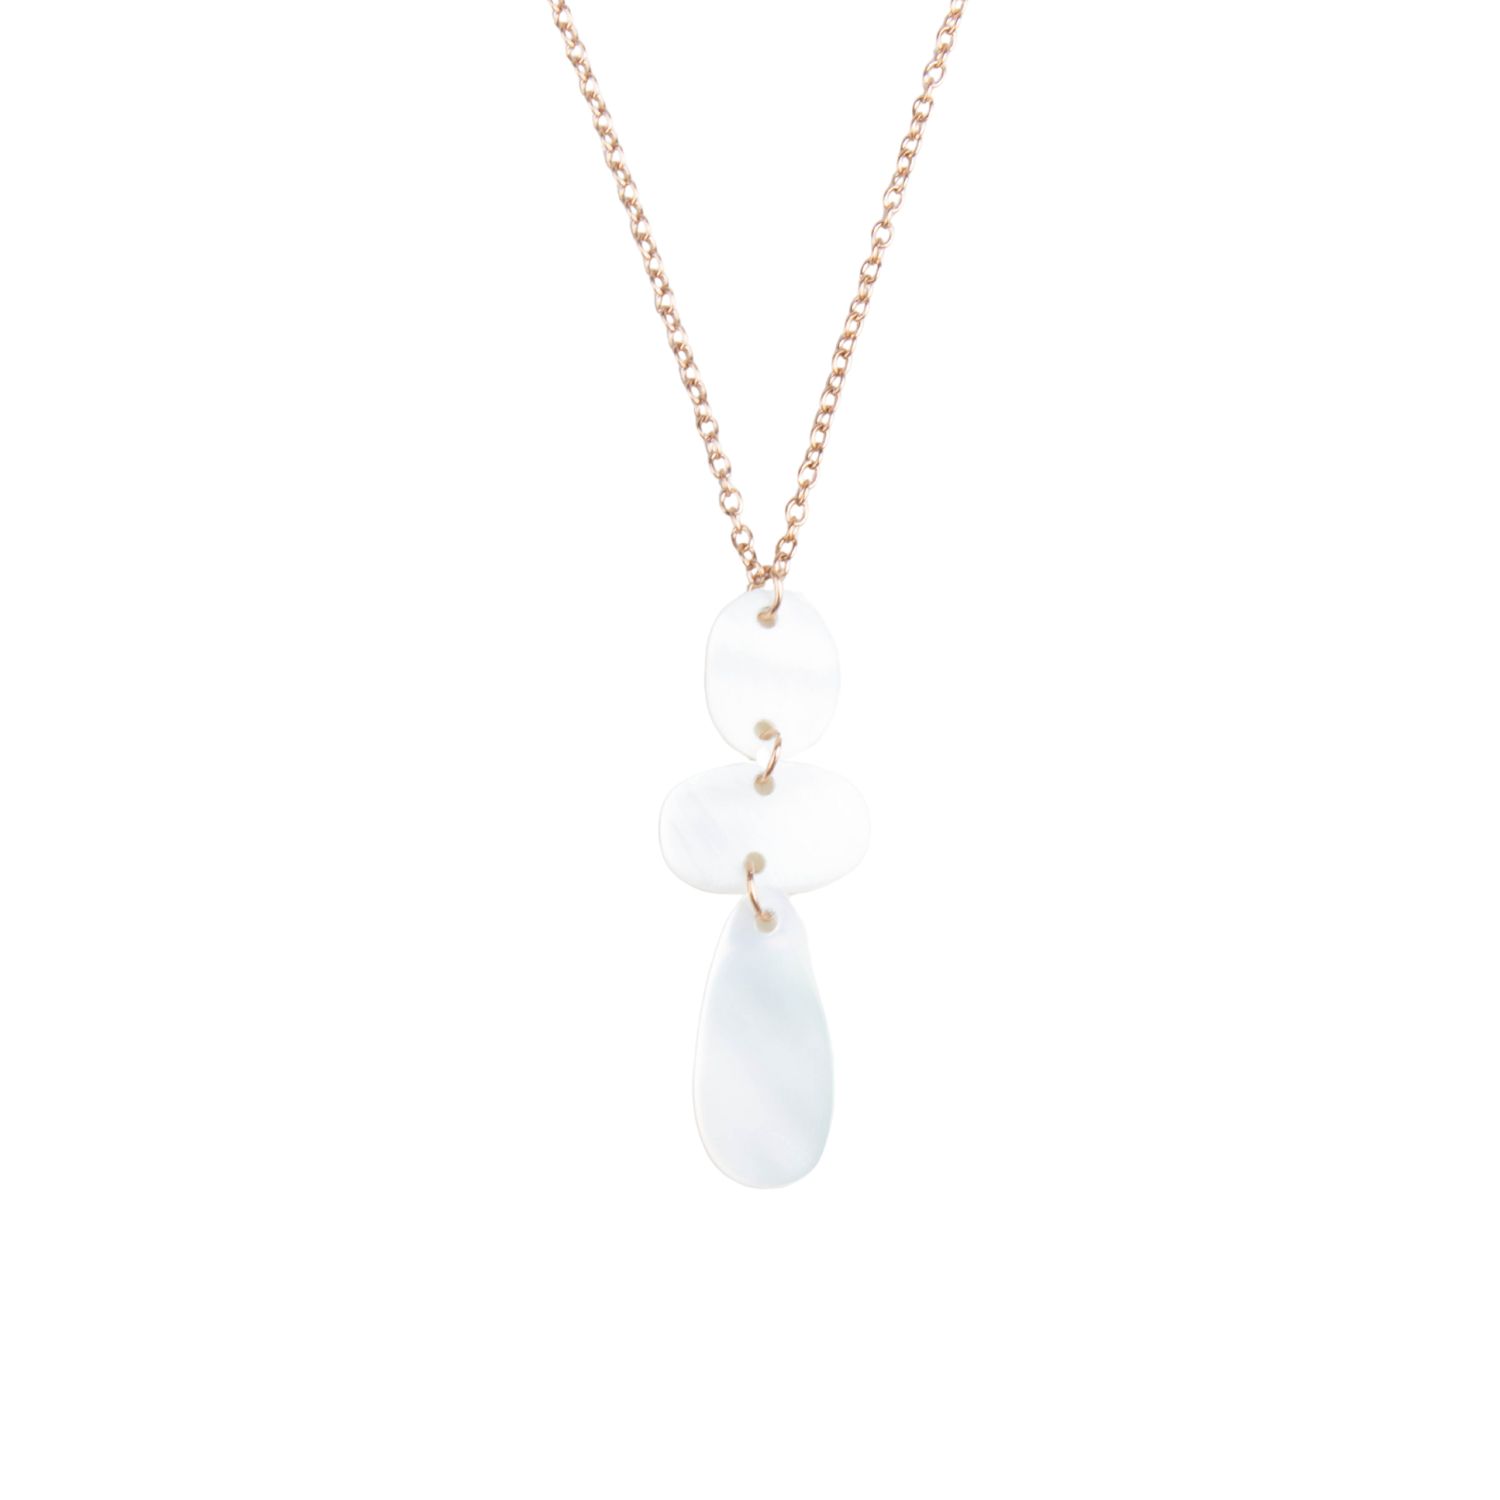 Likha Women's White Mother-of-pearl Raindrop Necklace With Rose Gold Chain